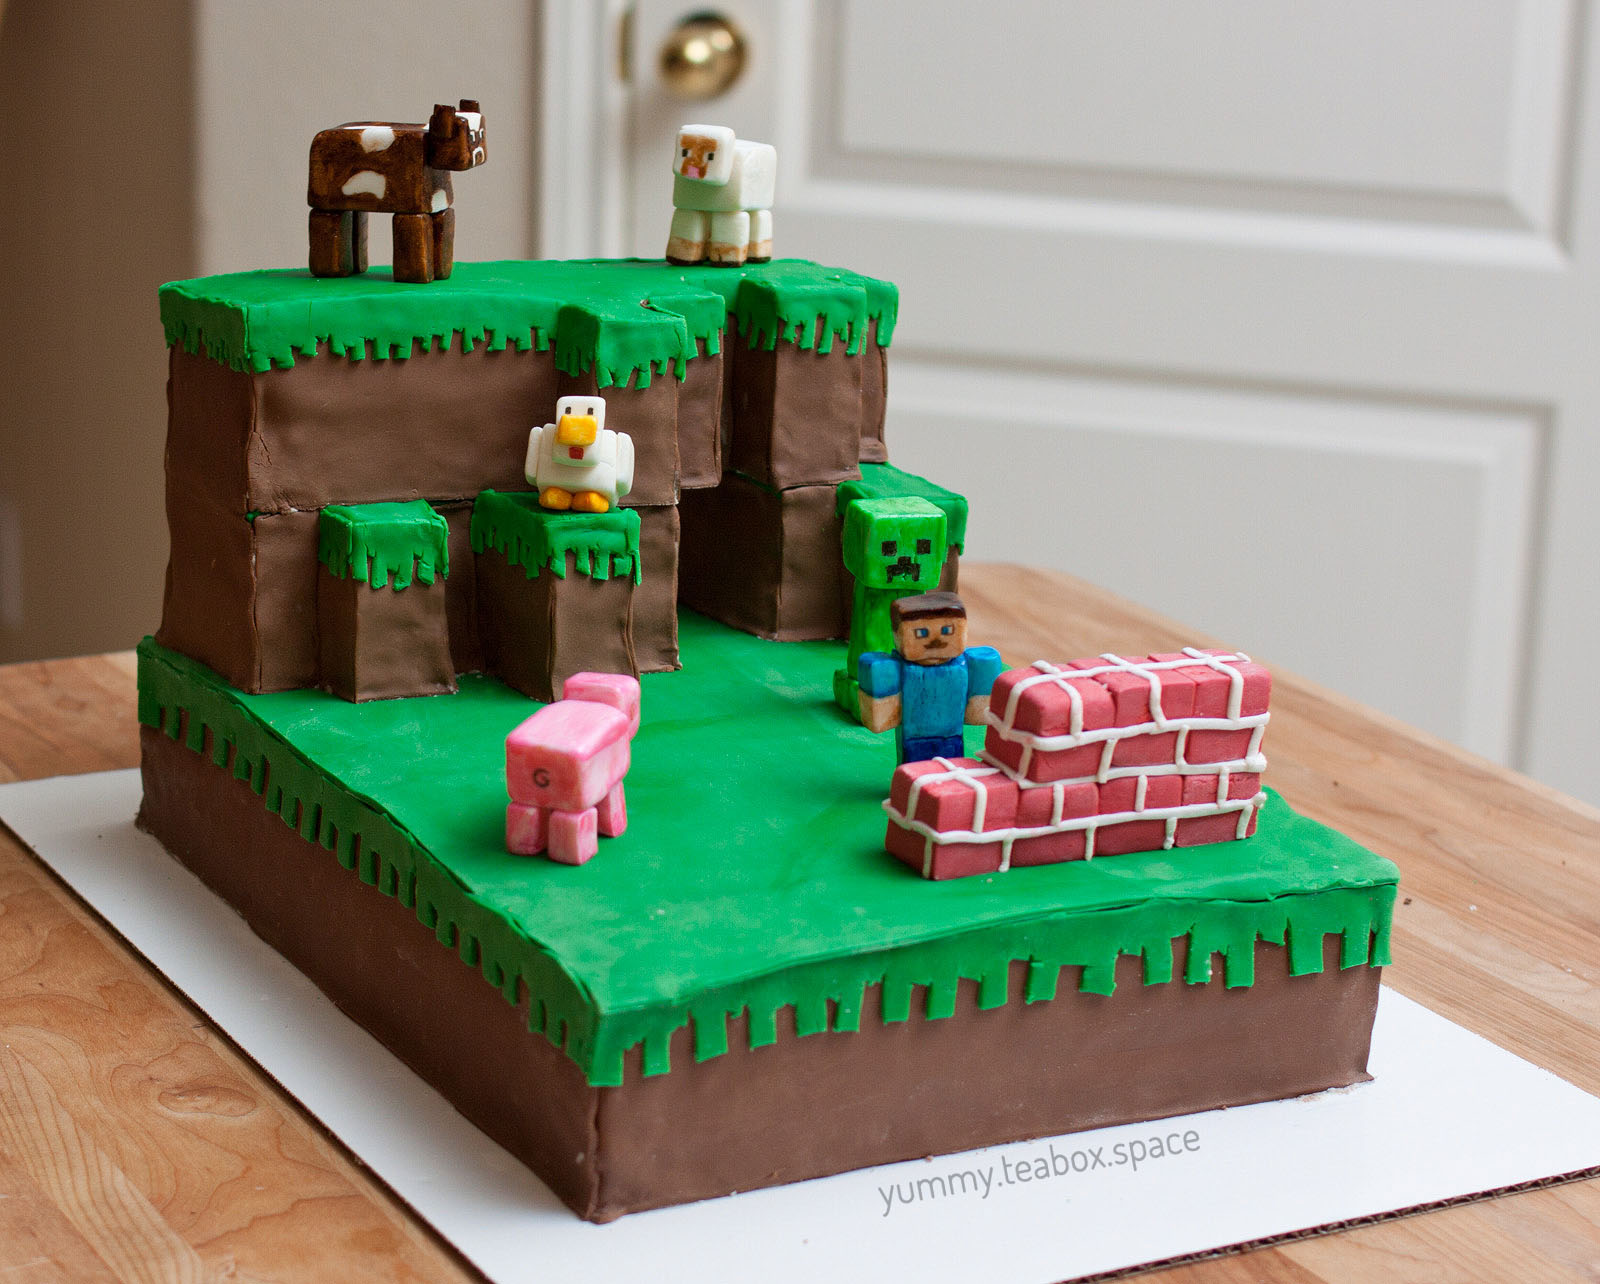 A cake that looks like a Minecraft scene with Steve and a Creeper behind him. There are Minecraft cow, sheep, chicken, and pig figures on the cake too.